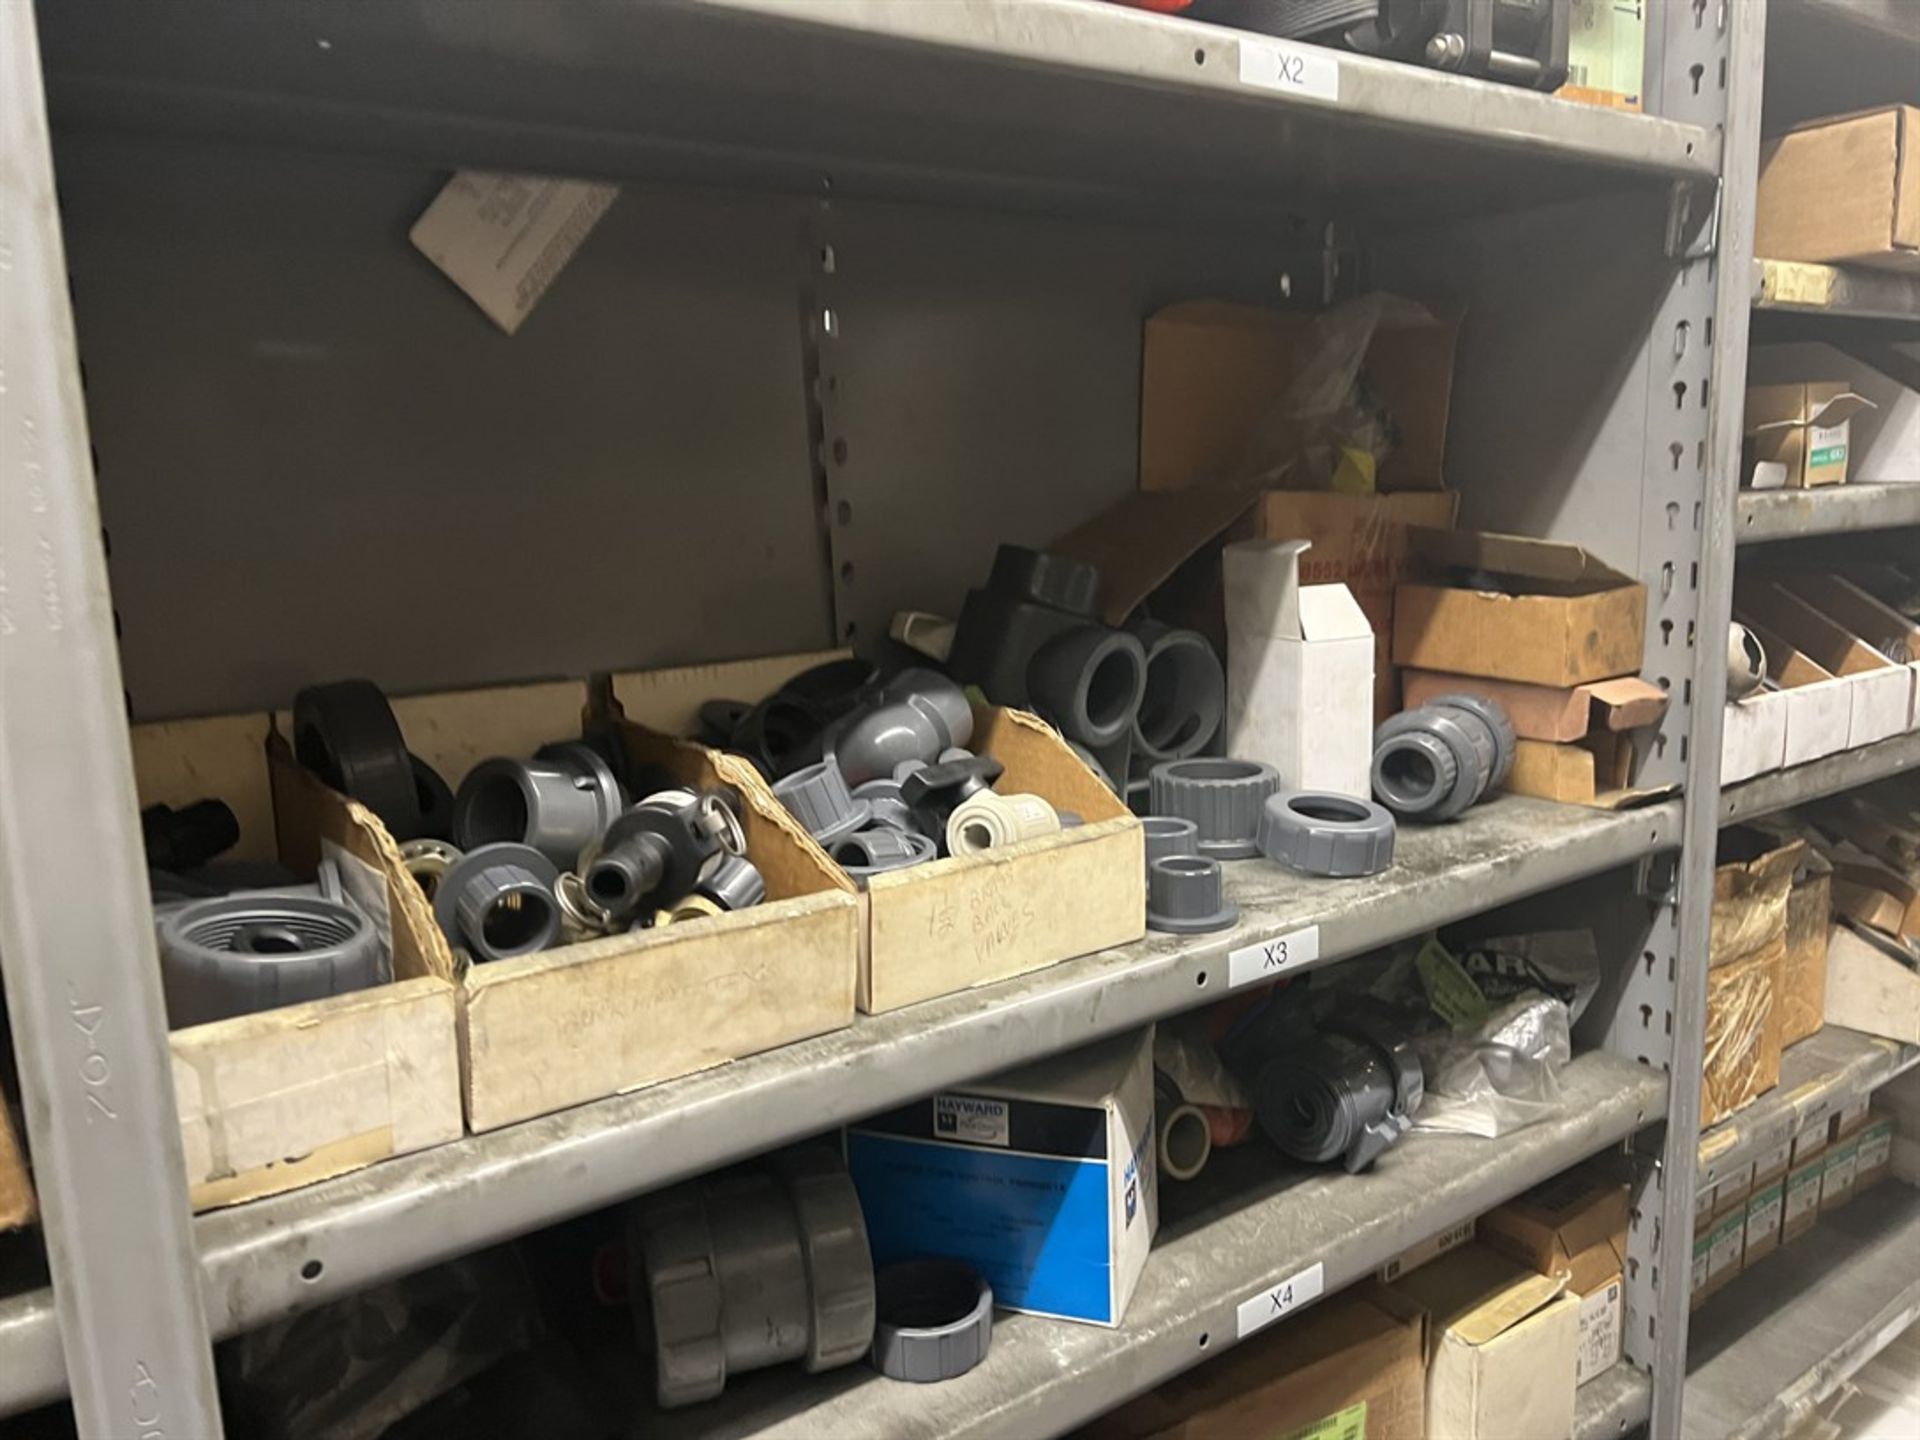 Maintenance Crib- Row of Shop Shelving w/ Contents Including Bearings, Pulleys, Belts, Valves, PVC - Image 18 of 26